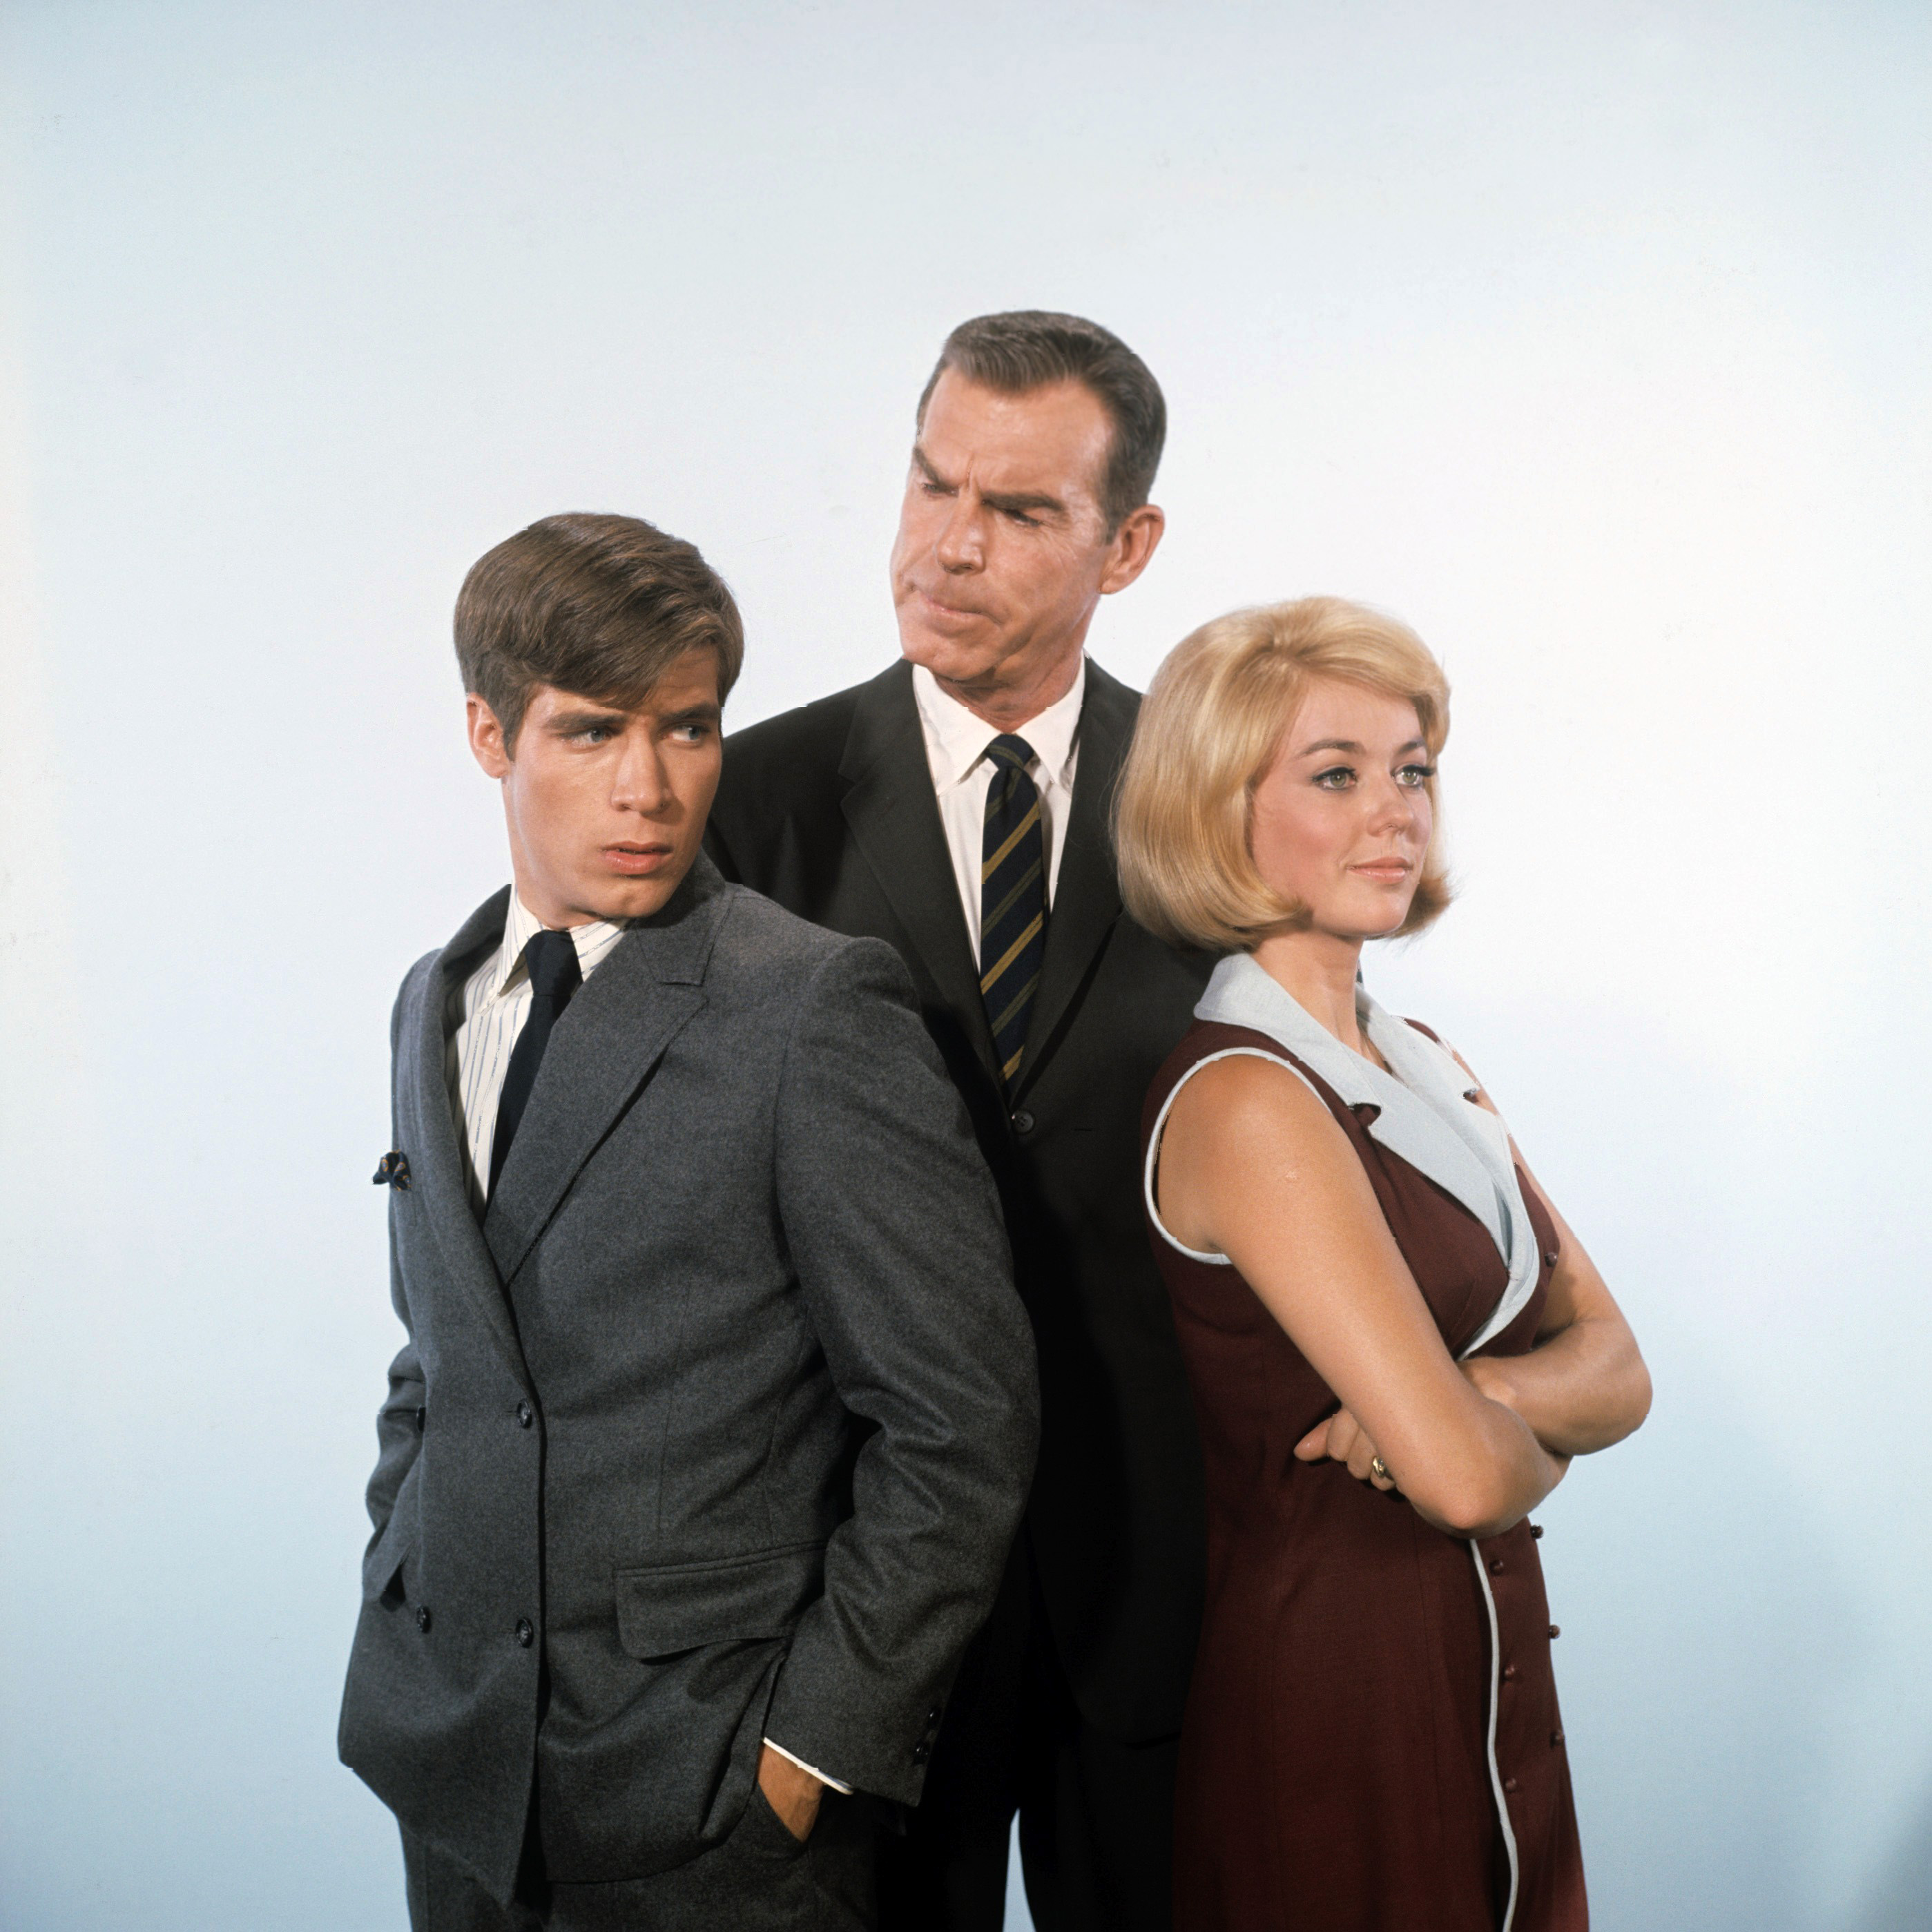 Don Grady, Fred MacMurray and Tina Cole on "My Three Sons" in 1968 | Source: Getty Images